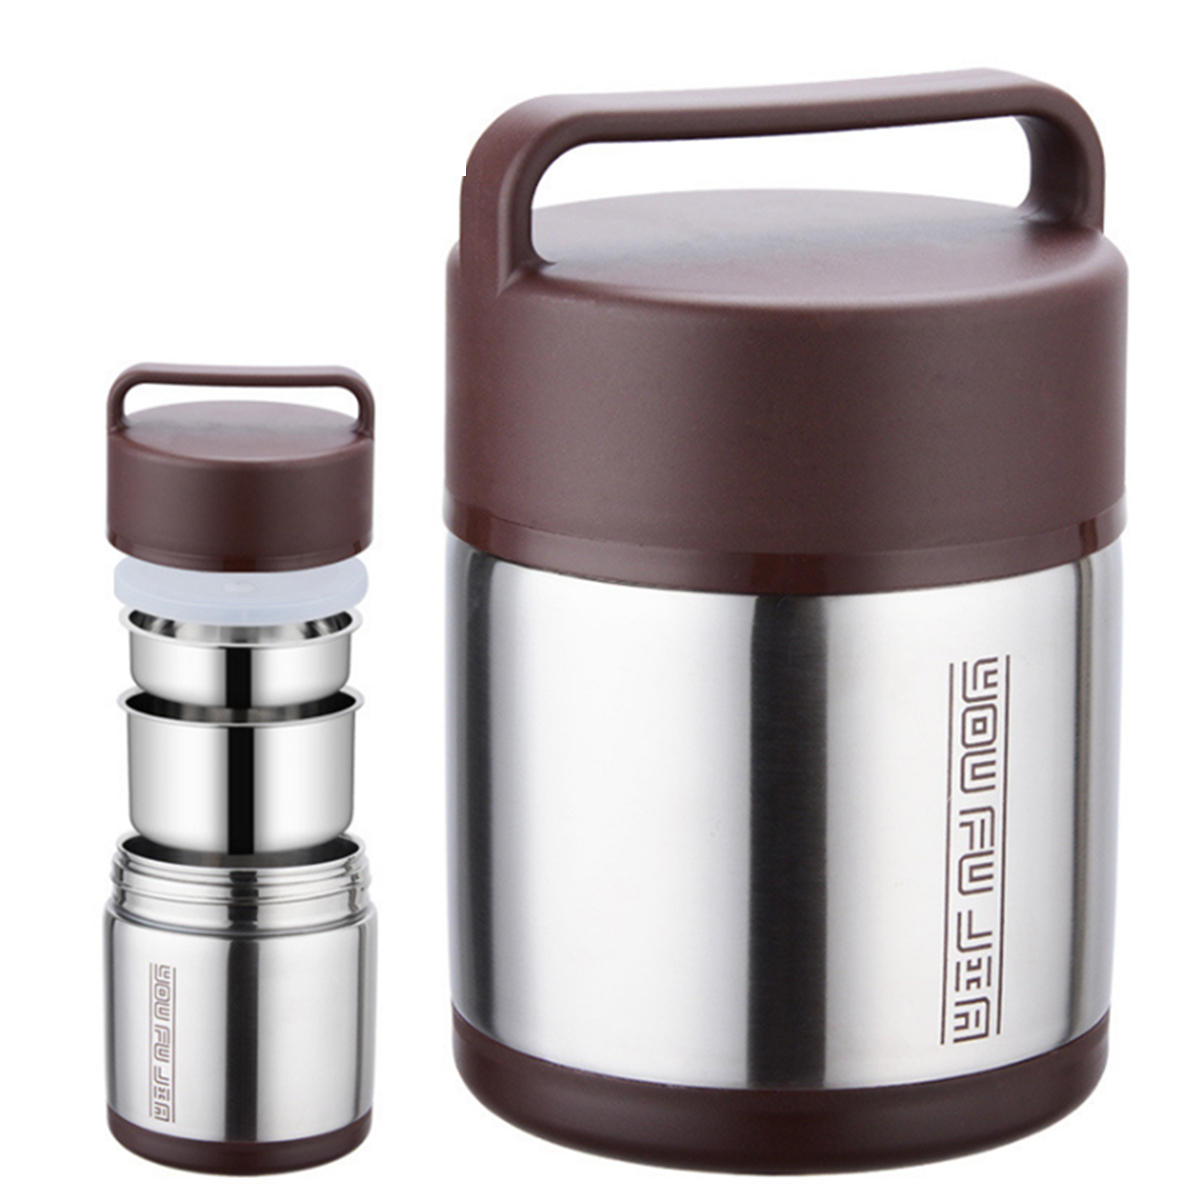 Vacuum Insulated Lunch Box Stainless Steel Jar Hot Cold Thermos